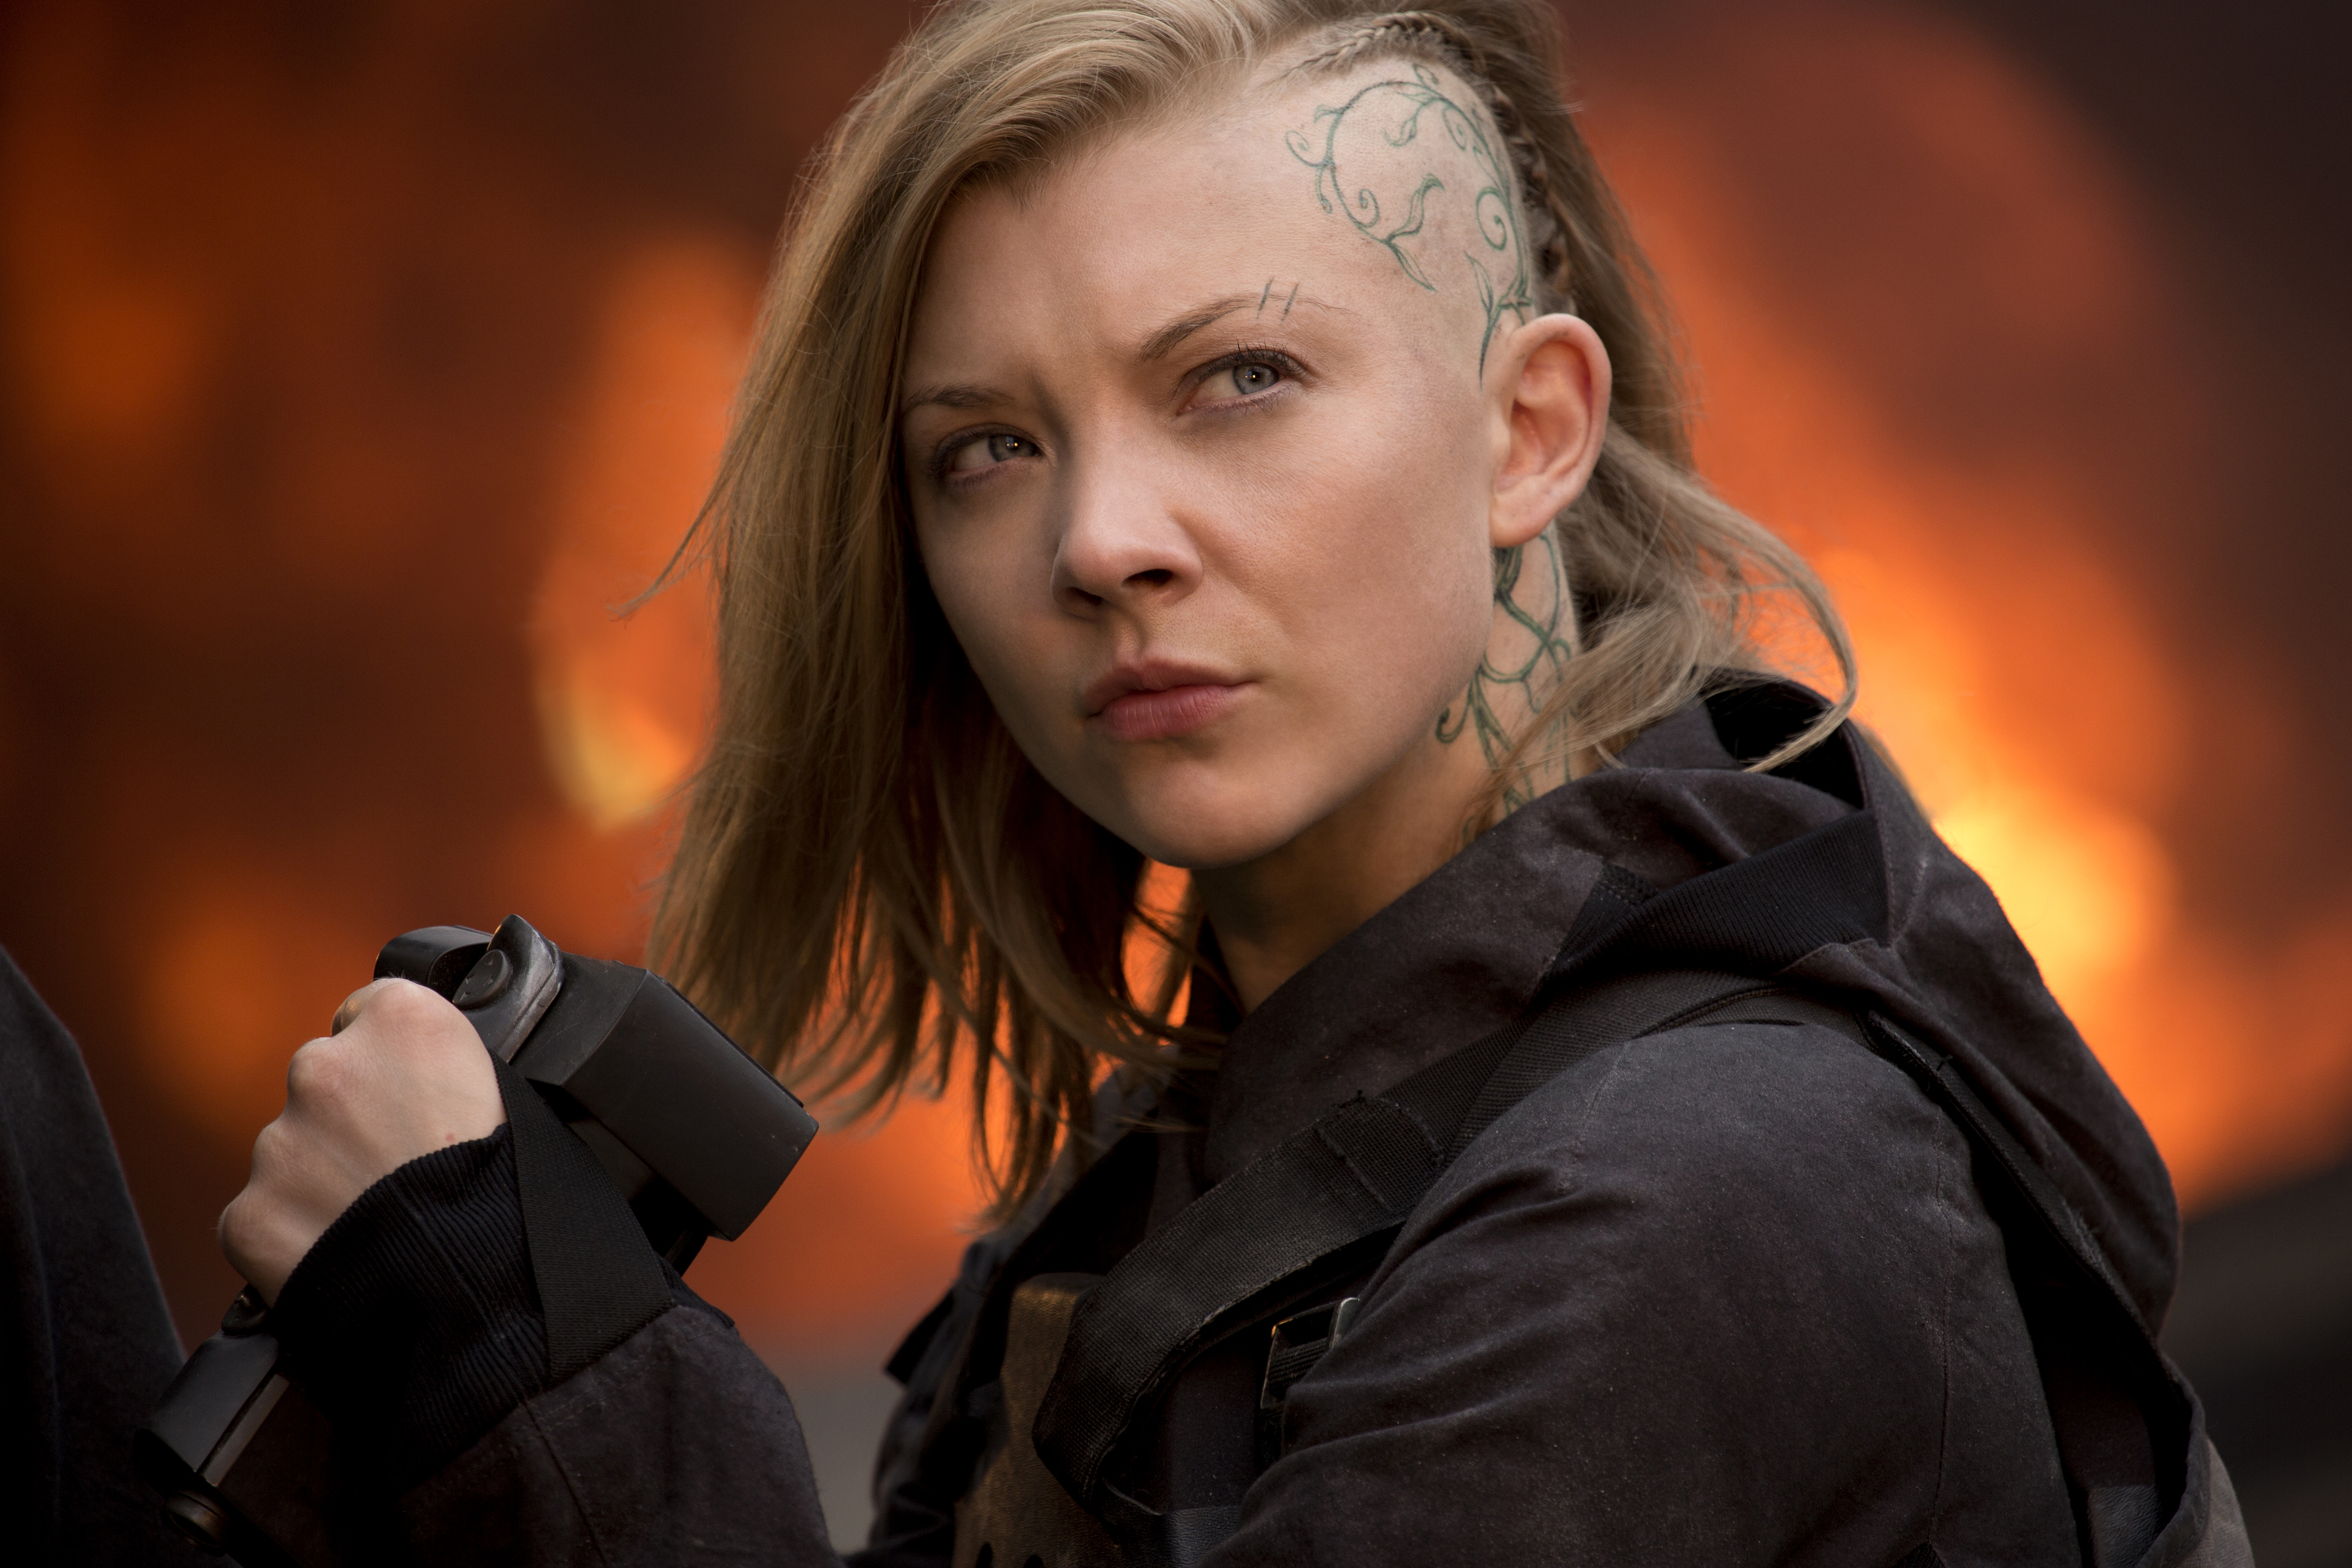 movie, the hunger games: mockingjay part 1, cressida (the hunger games), natalie dormer, the hunger games